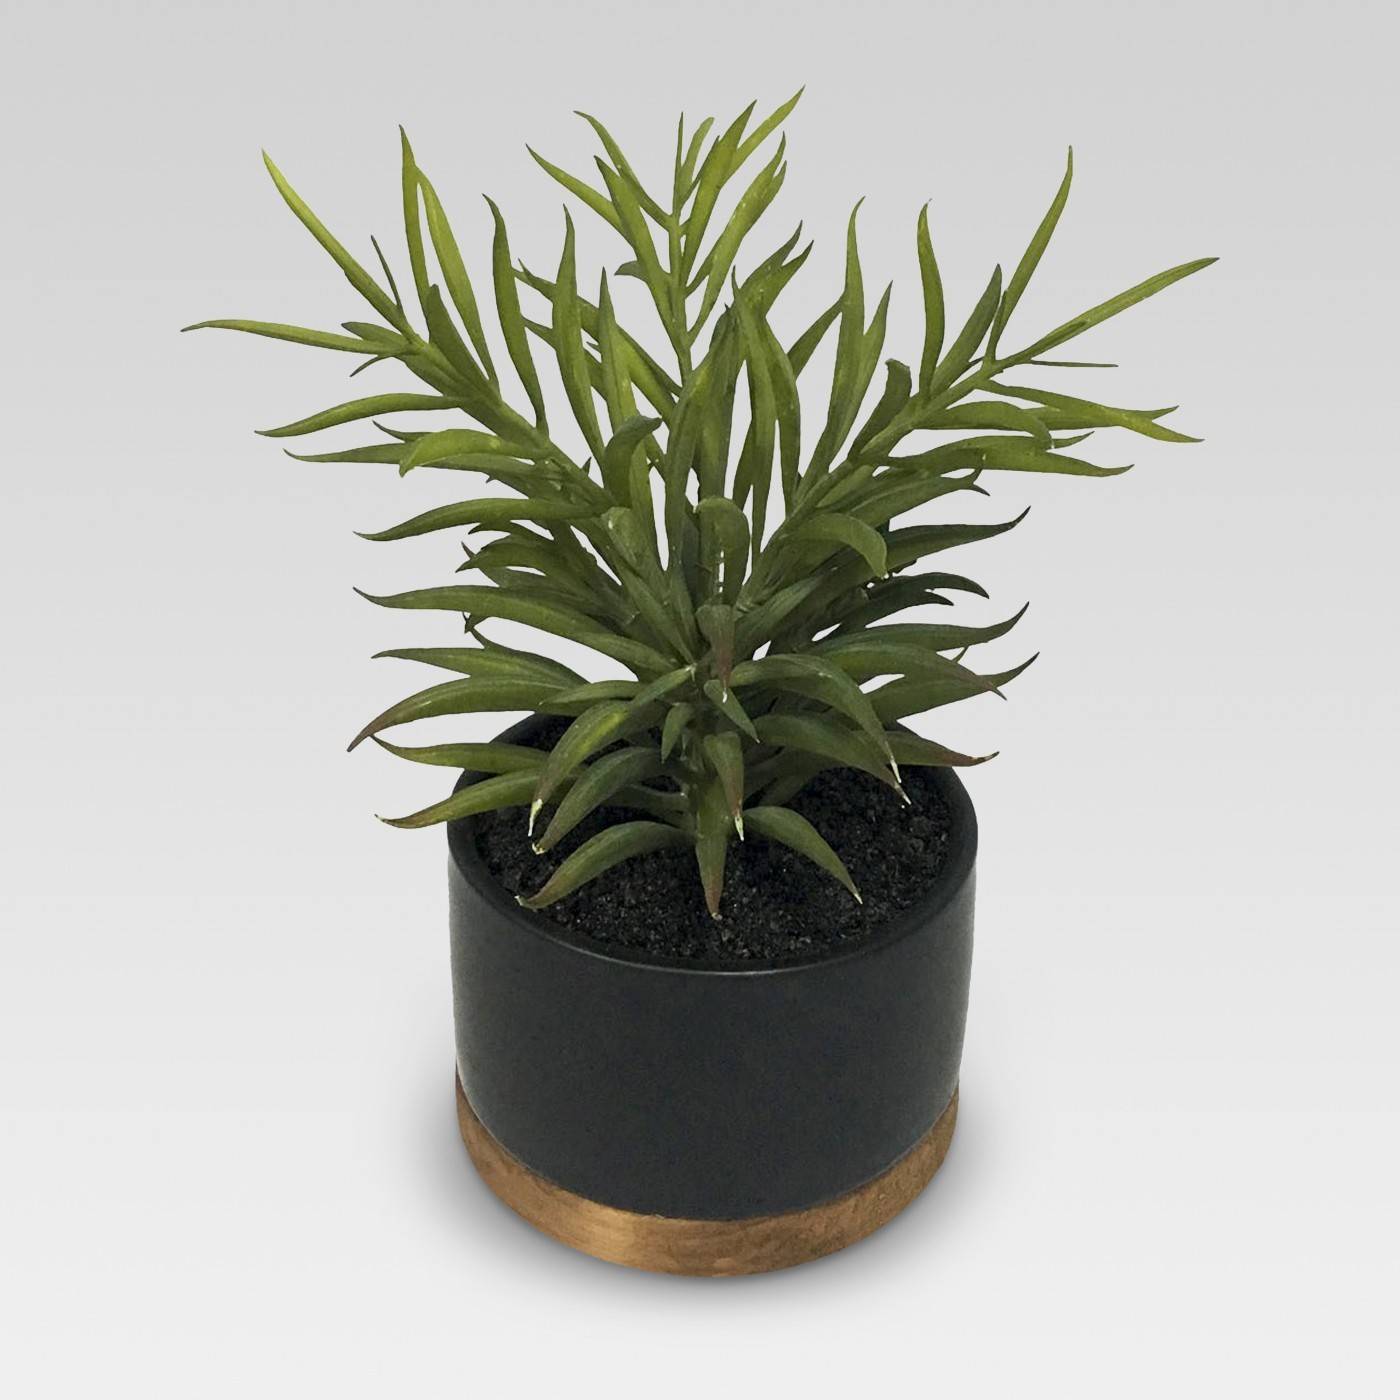 A small potted plant with elongated leaves sitting in a green planter with a gold trimmed base.